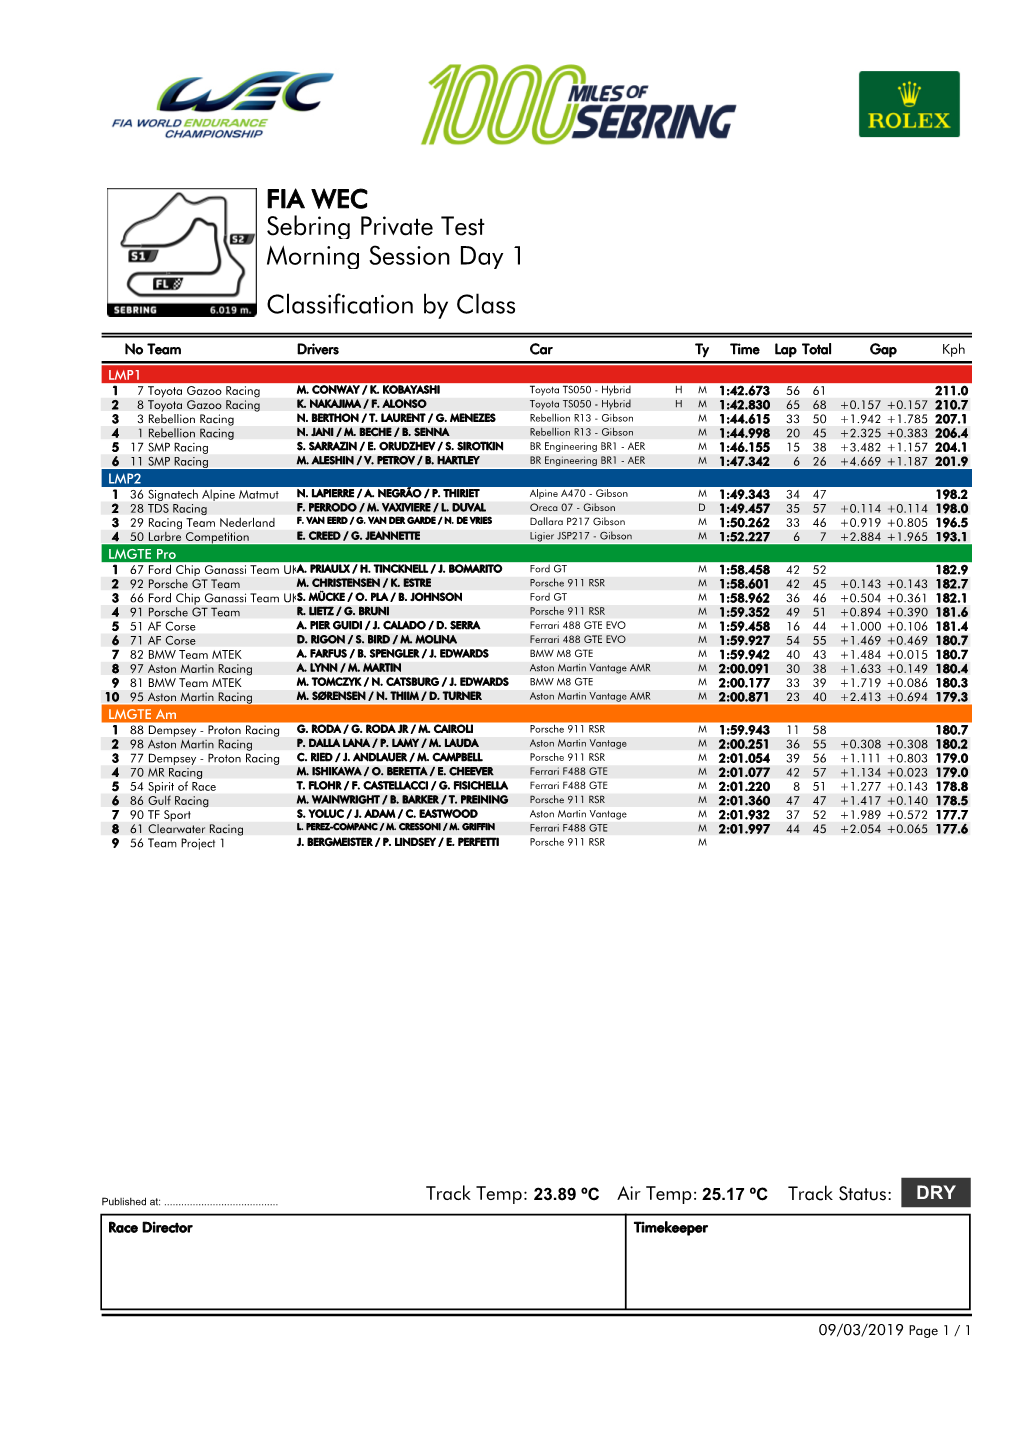 Morning Session Day 1 Sebring Private Test FIA WEC Classification